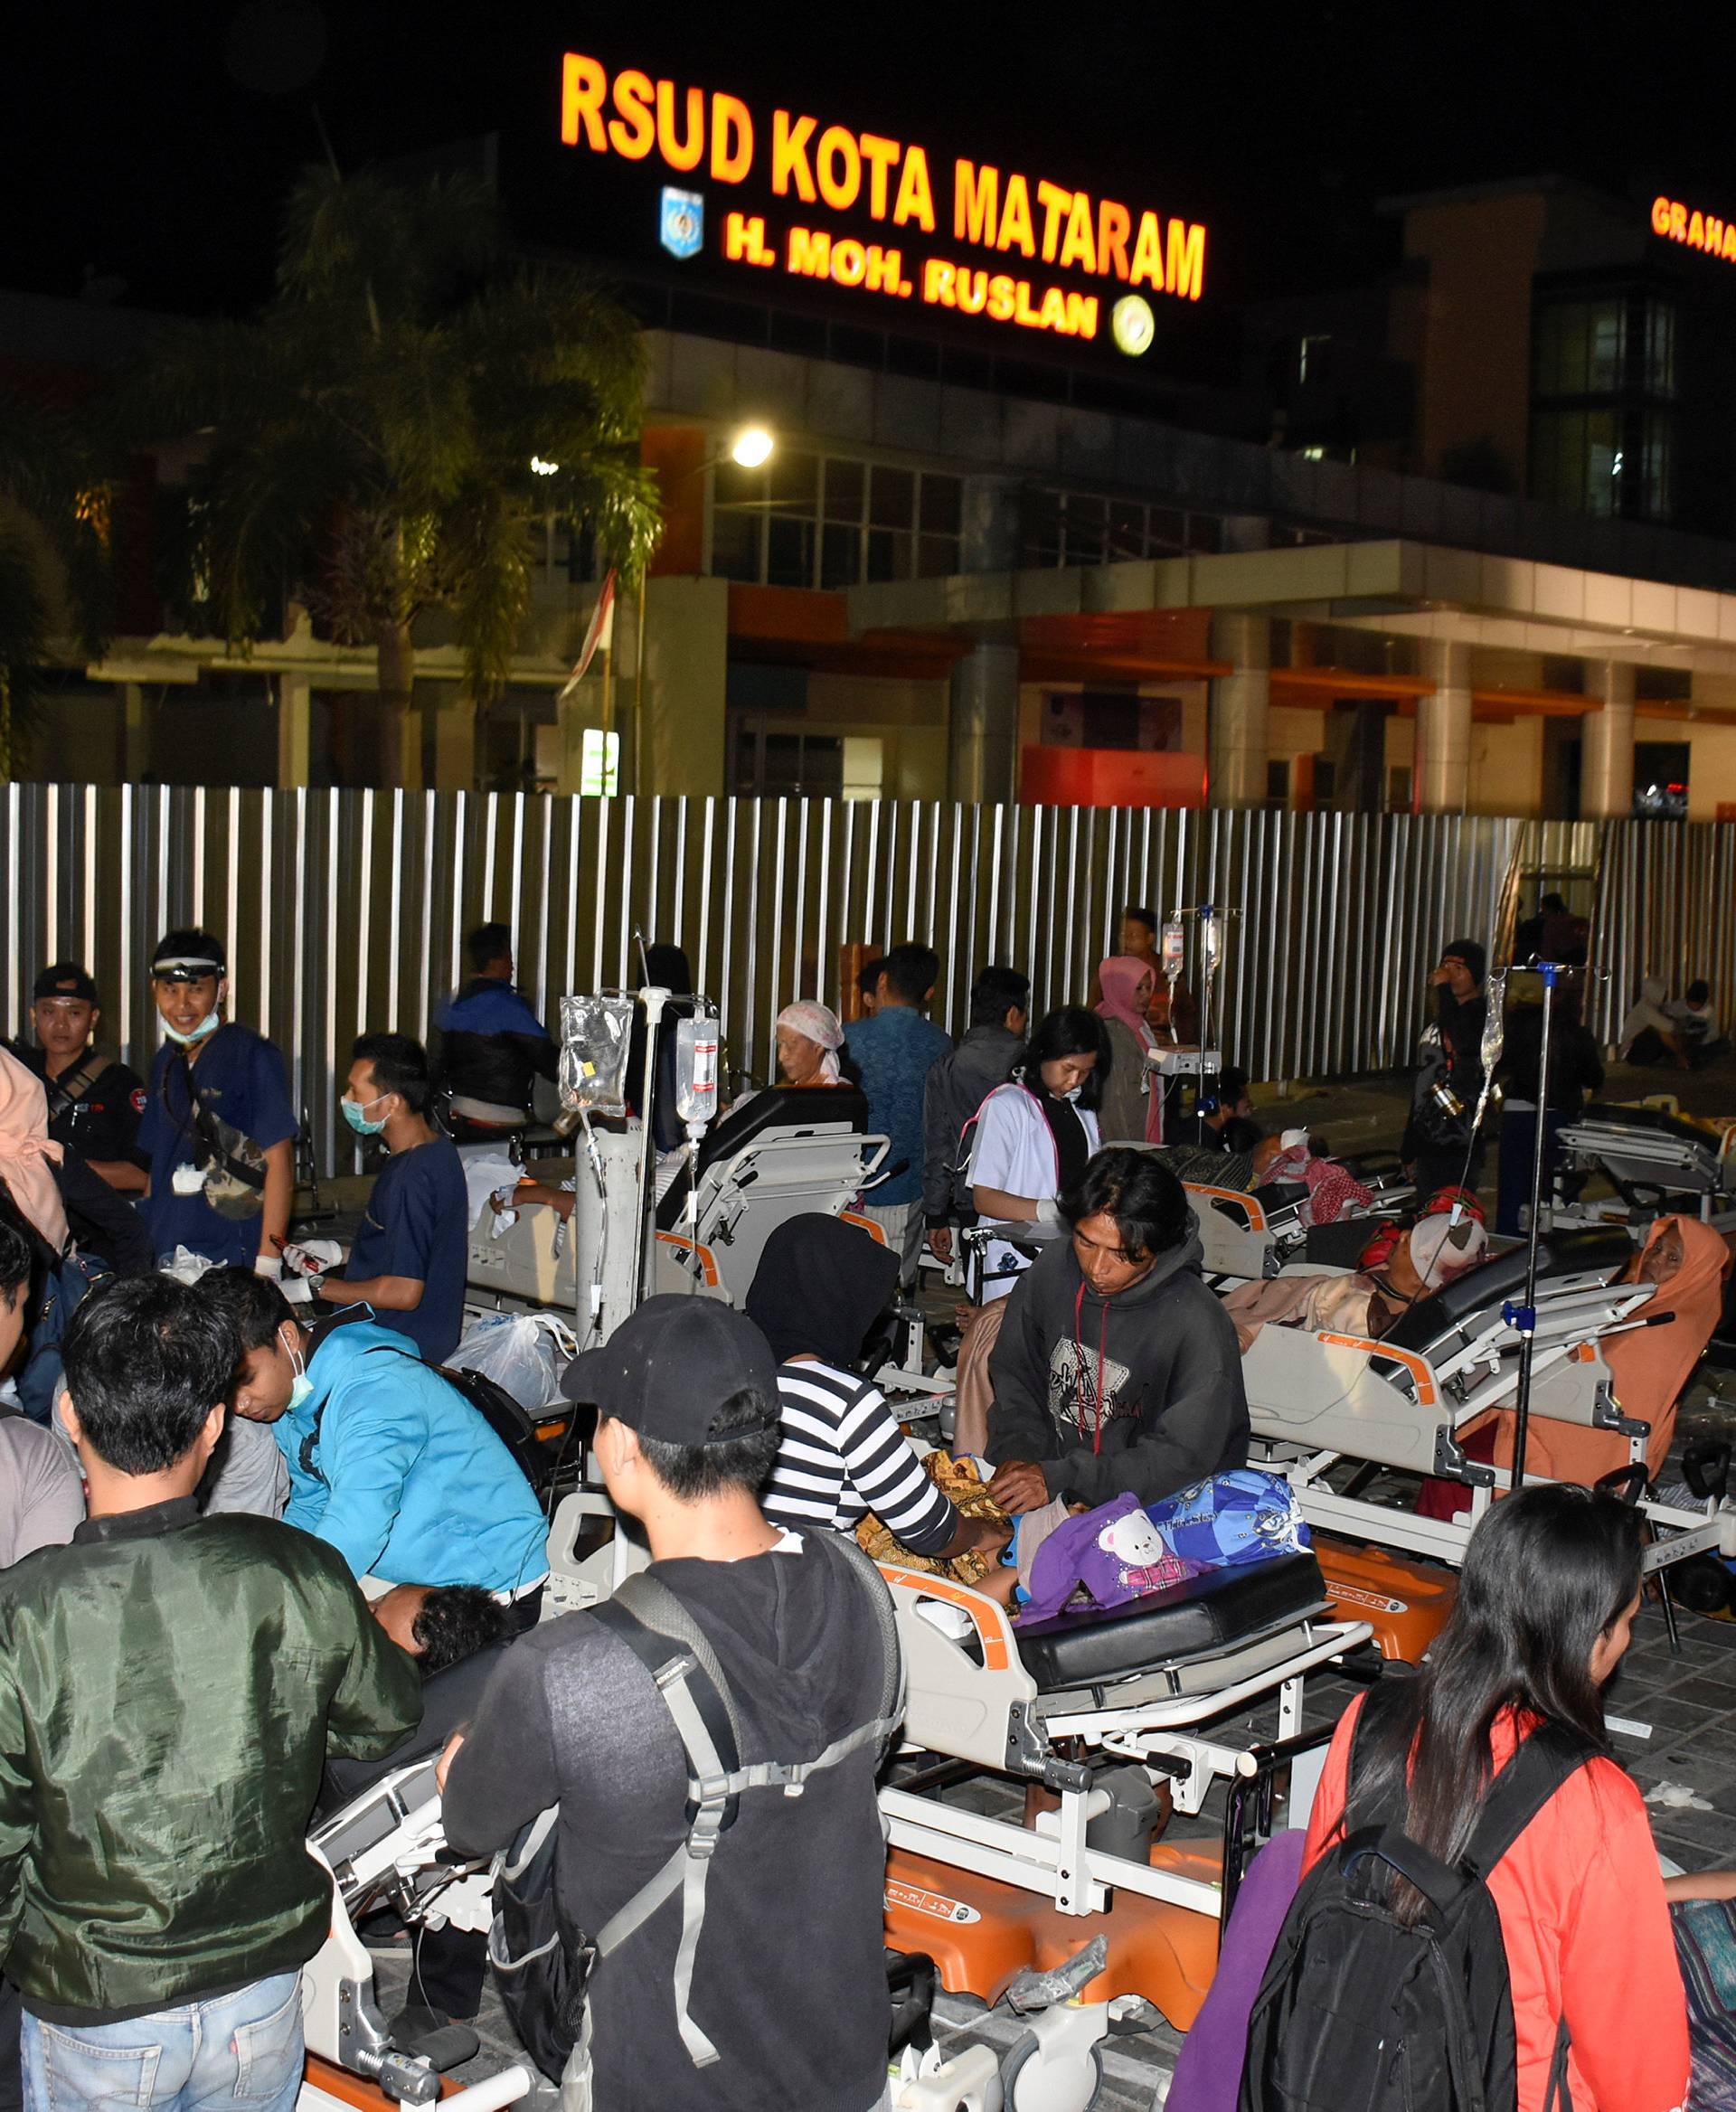 Patients are evacuated outside to the Mataram City hospital parking lot after a strong earthquake in Mataram, Lombok island